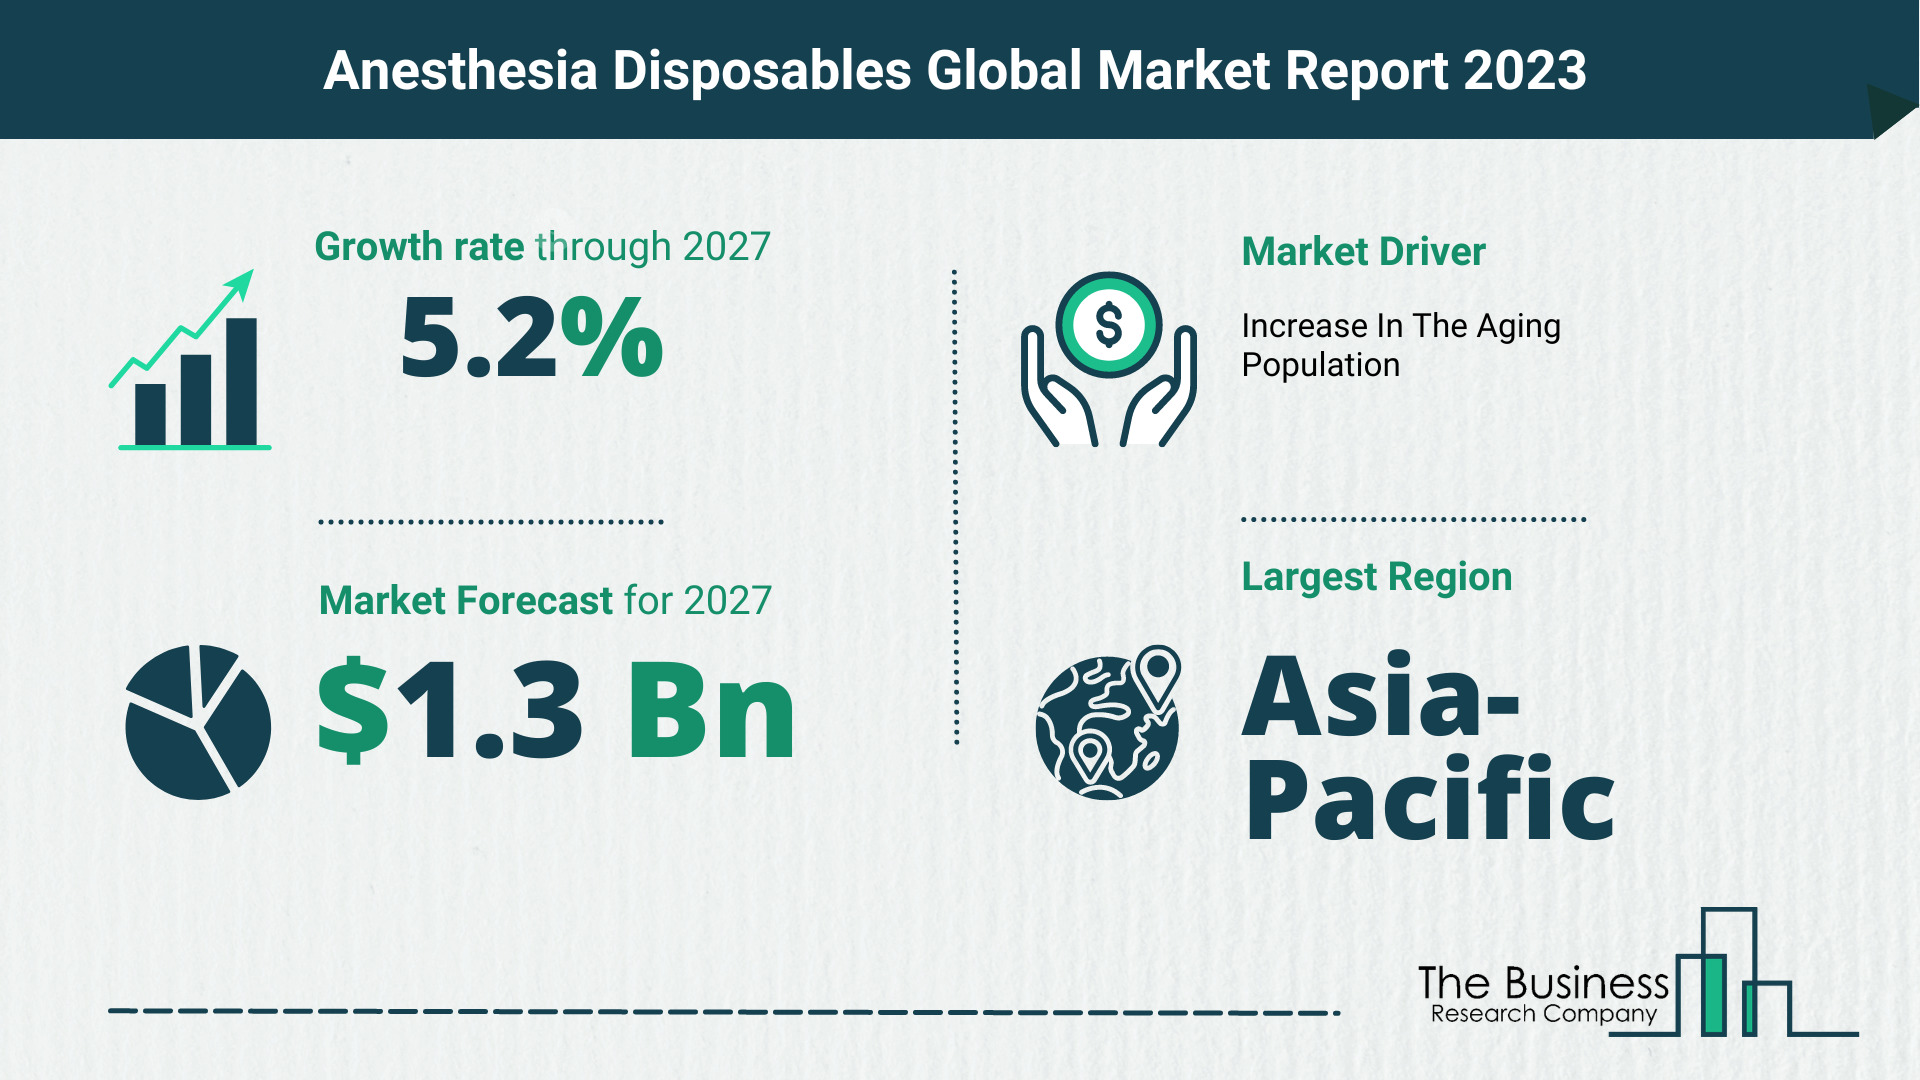 What Will The Anesthesia Disposables Market Look Like In 2023?